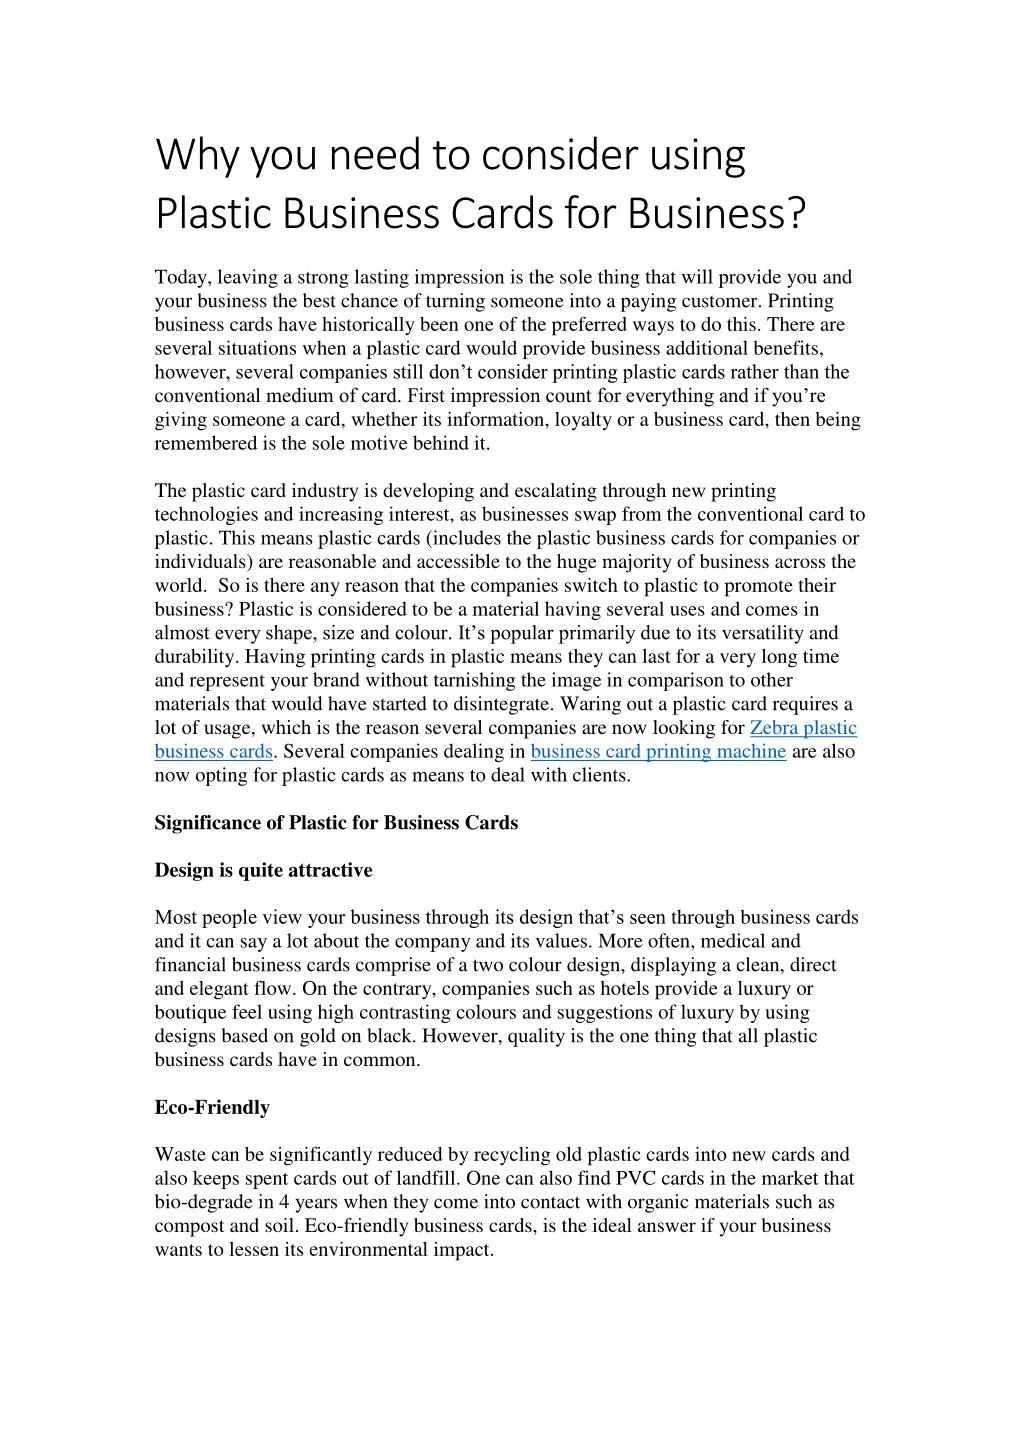 why you need to consider using plastic business